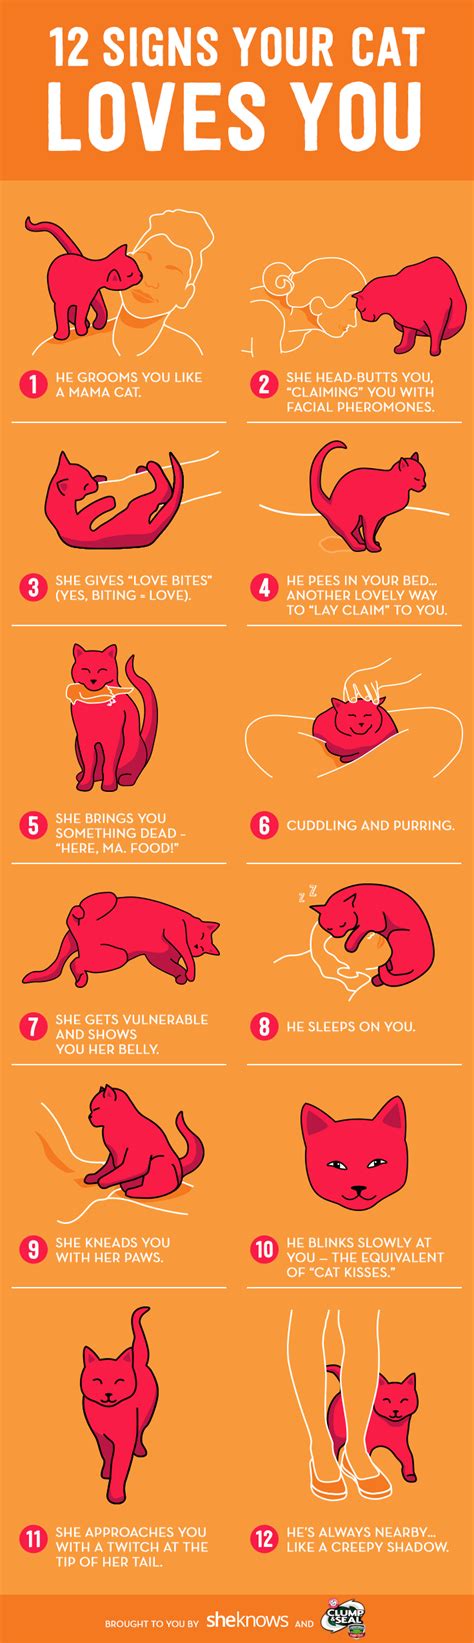 How do cats tell you they miss you?